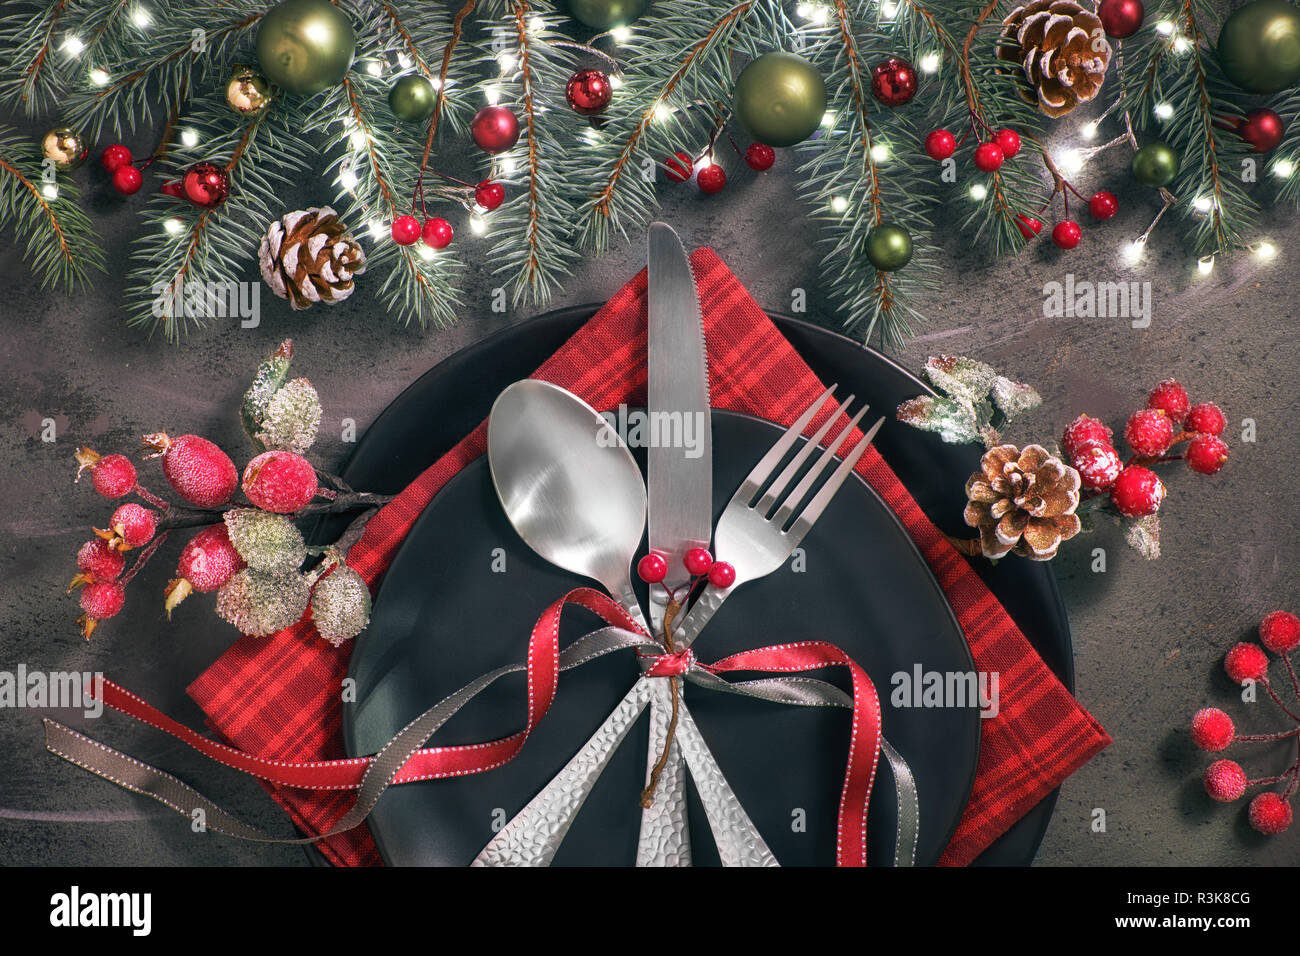 Christmas table setup on dark background. Flat lay with Xmas decorations in  green and red with frosted berries, trinkets, black plates and crockery  Stock Photo - Alamy